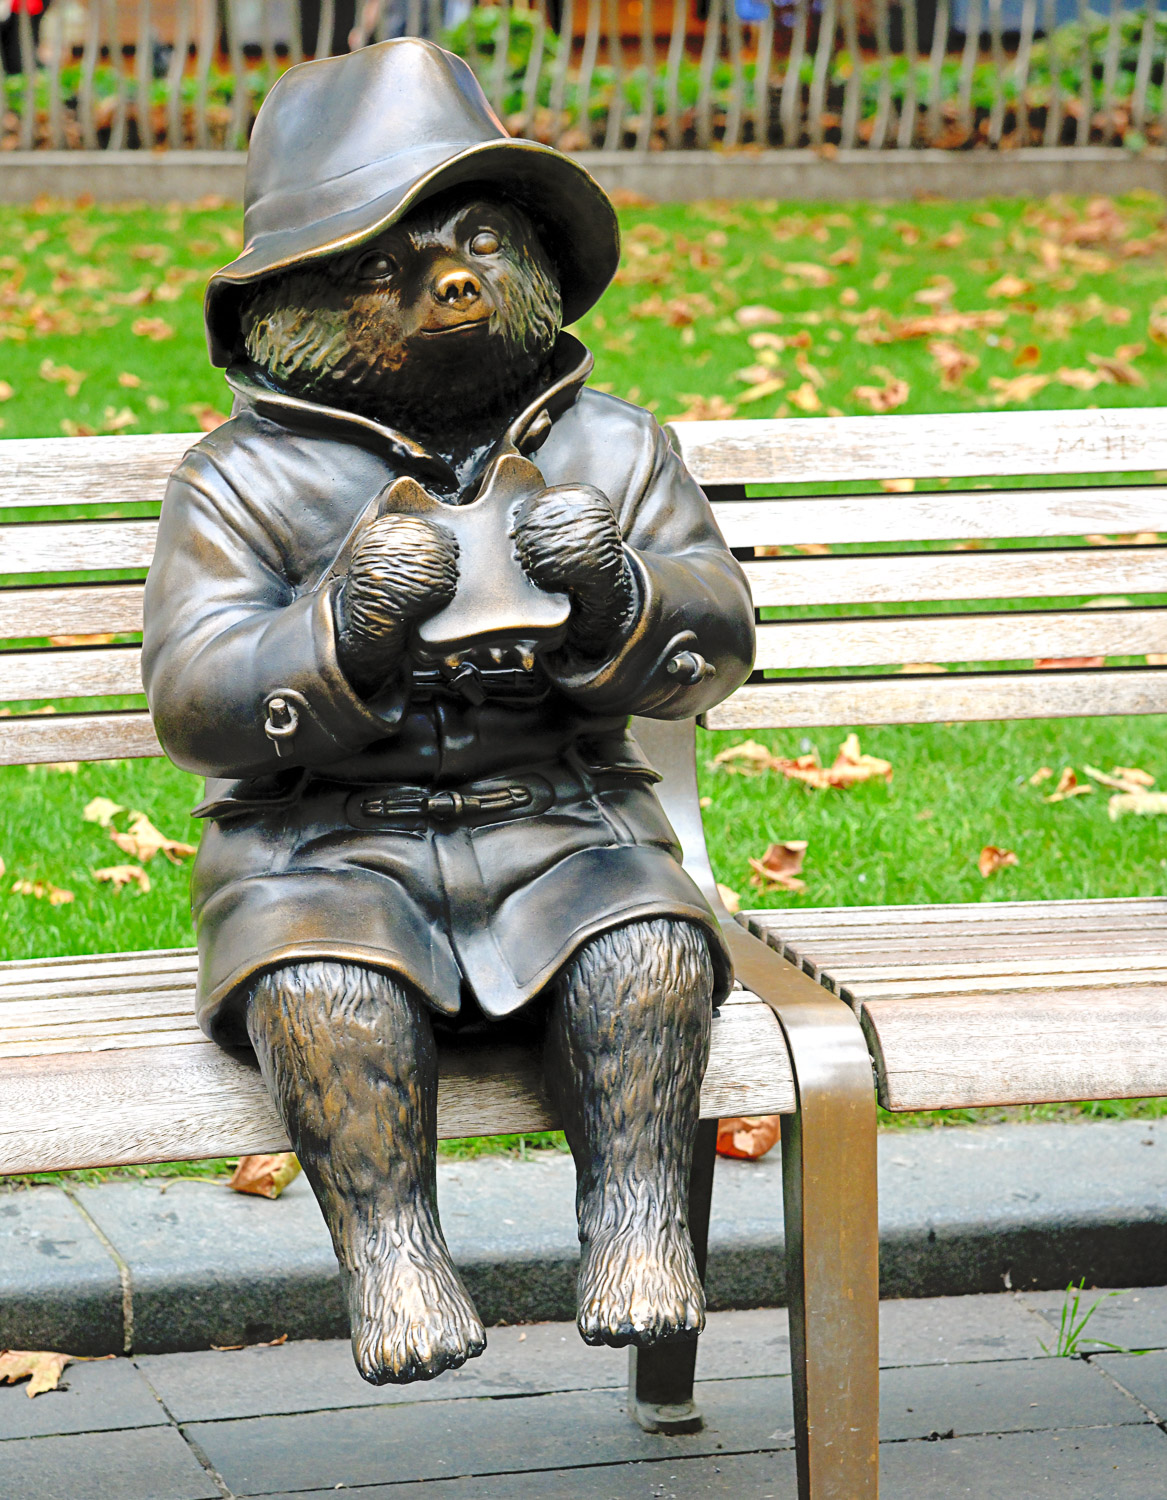 Statue of Paddington Bear with marmalade sandwich, sitting on a bench in Leicester Square - one of a string of statues to spot if you're looking for Paddington Bear in London with kids